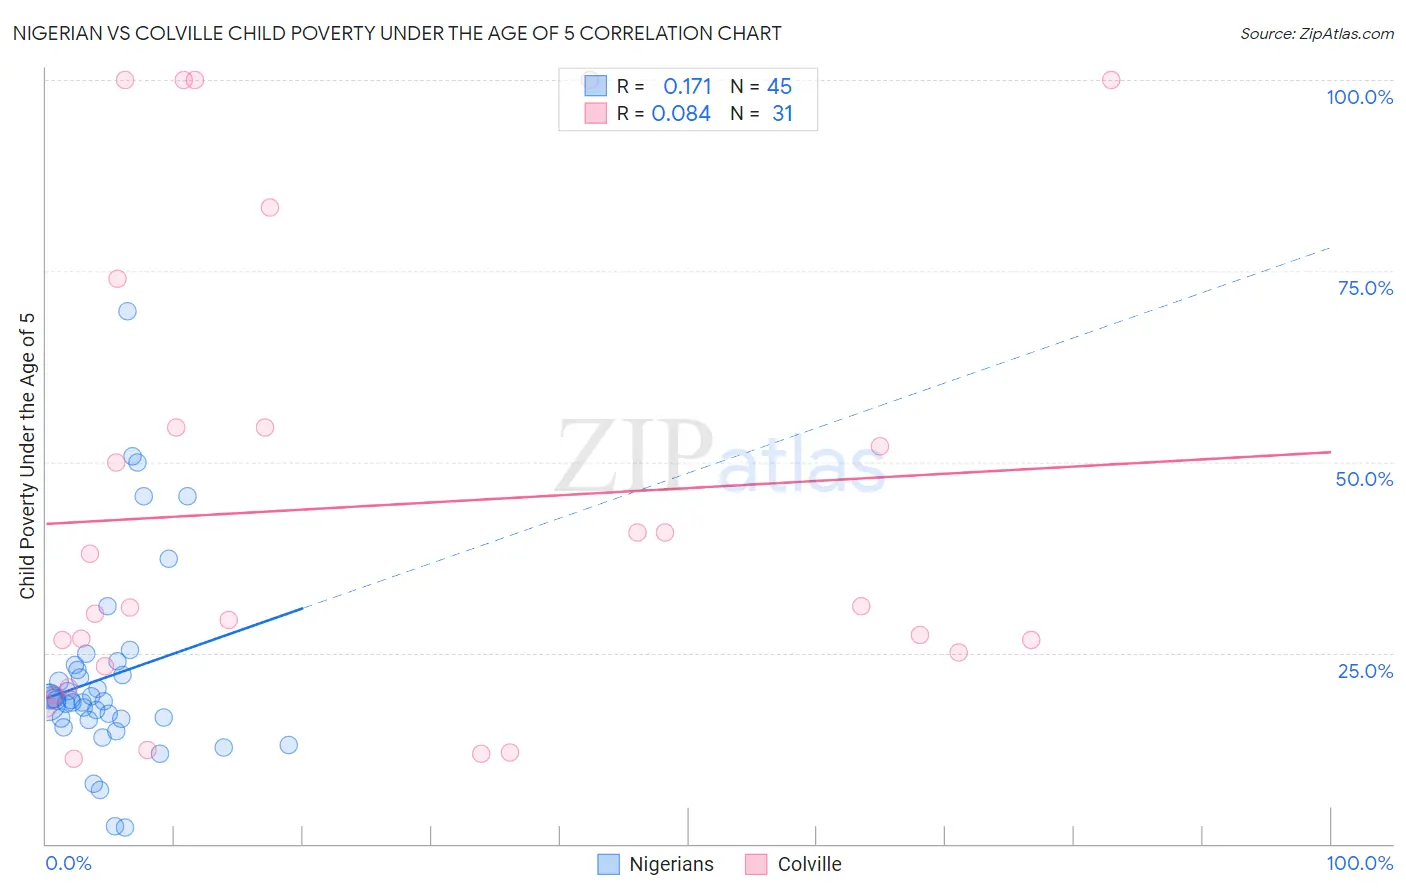 Nigerian vs Colville Child Poverty Under the Age of 5